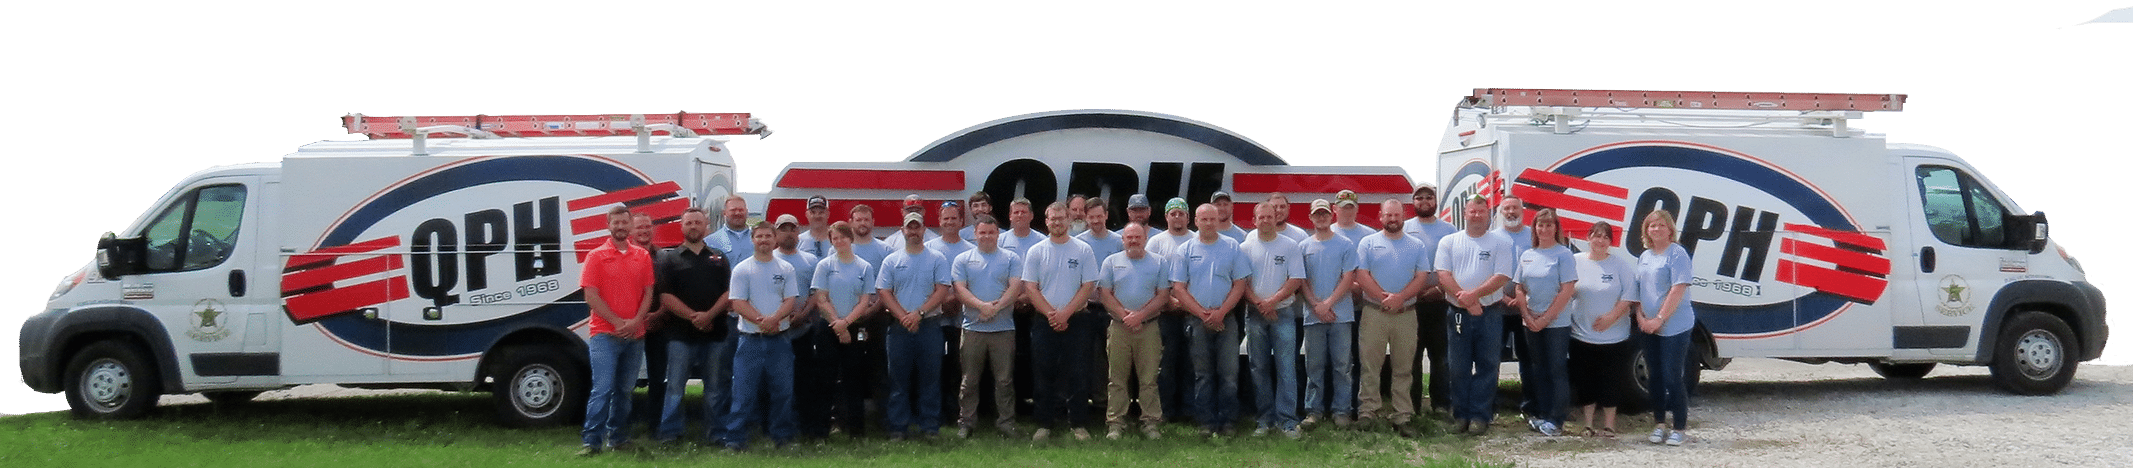 Our Team at QPH near Noblesville